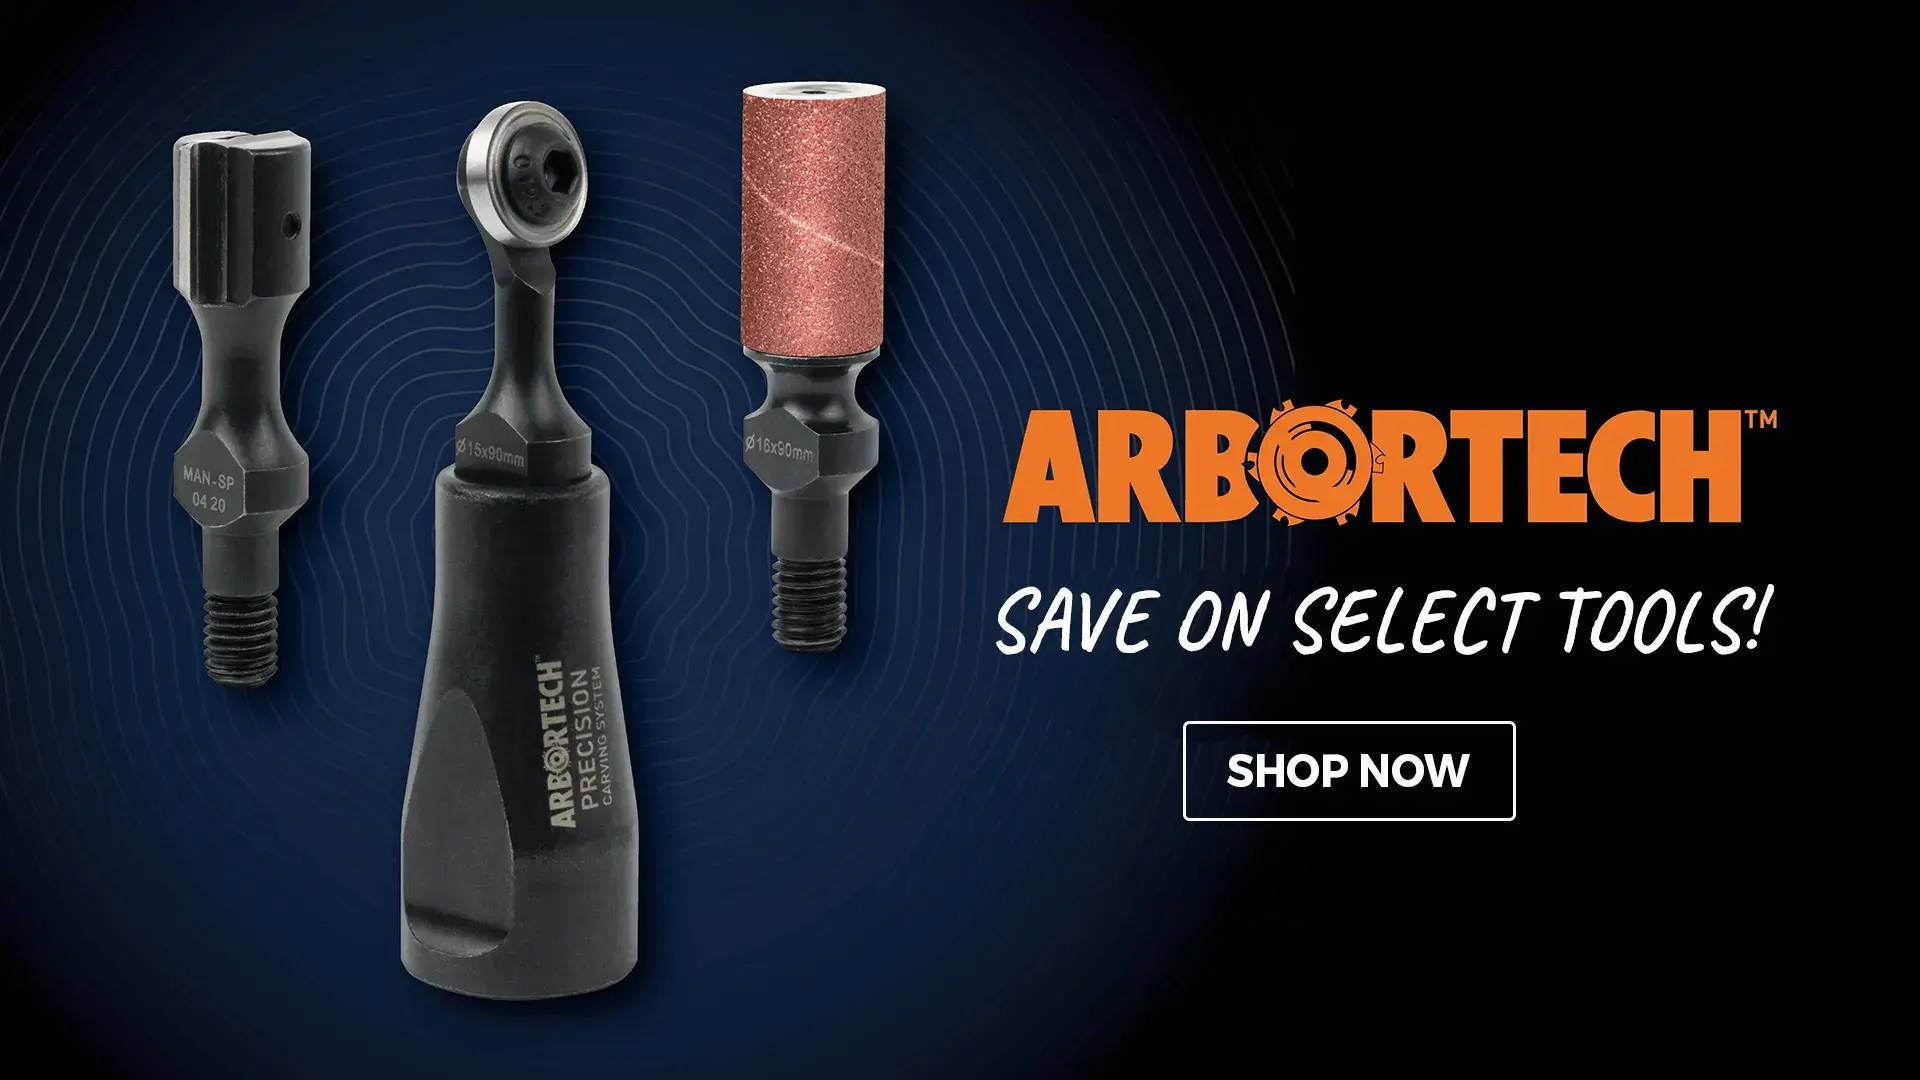 Save on select Arbortech Tools